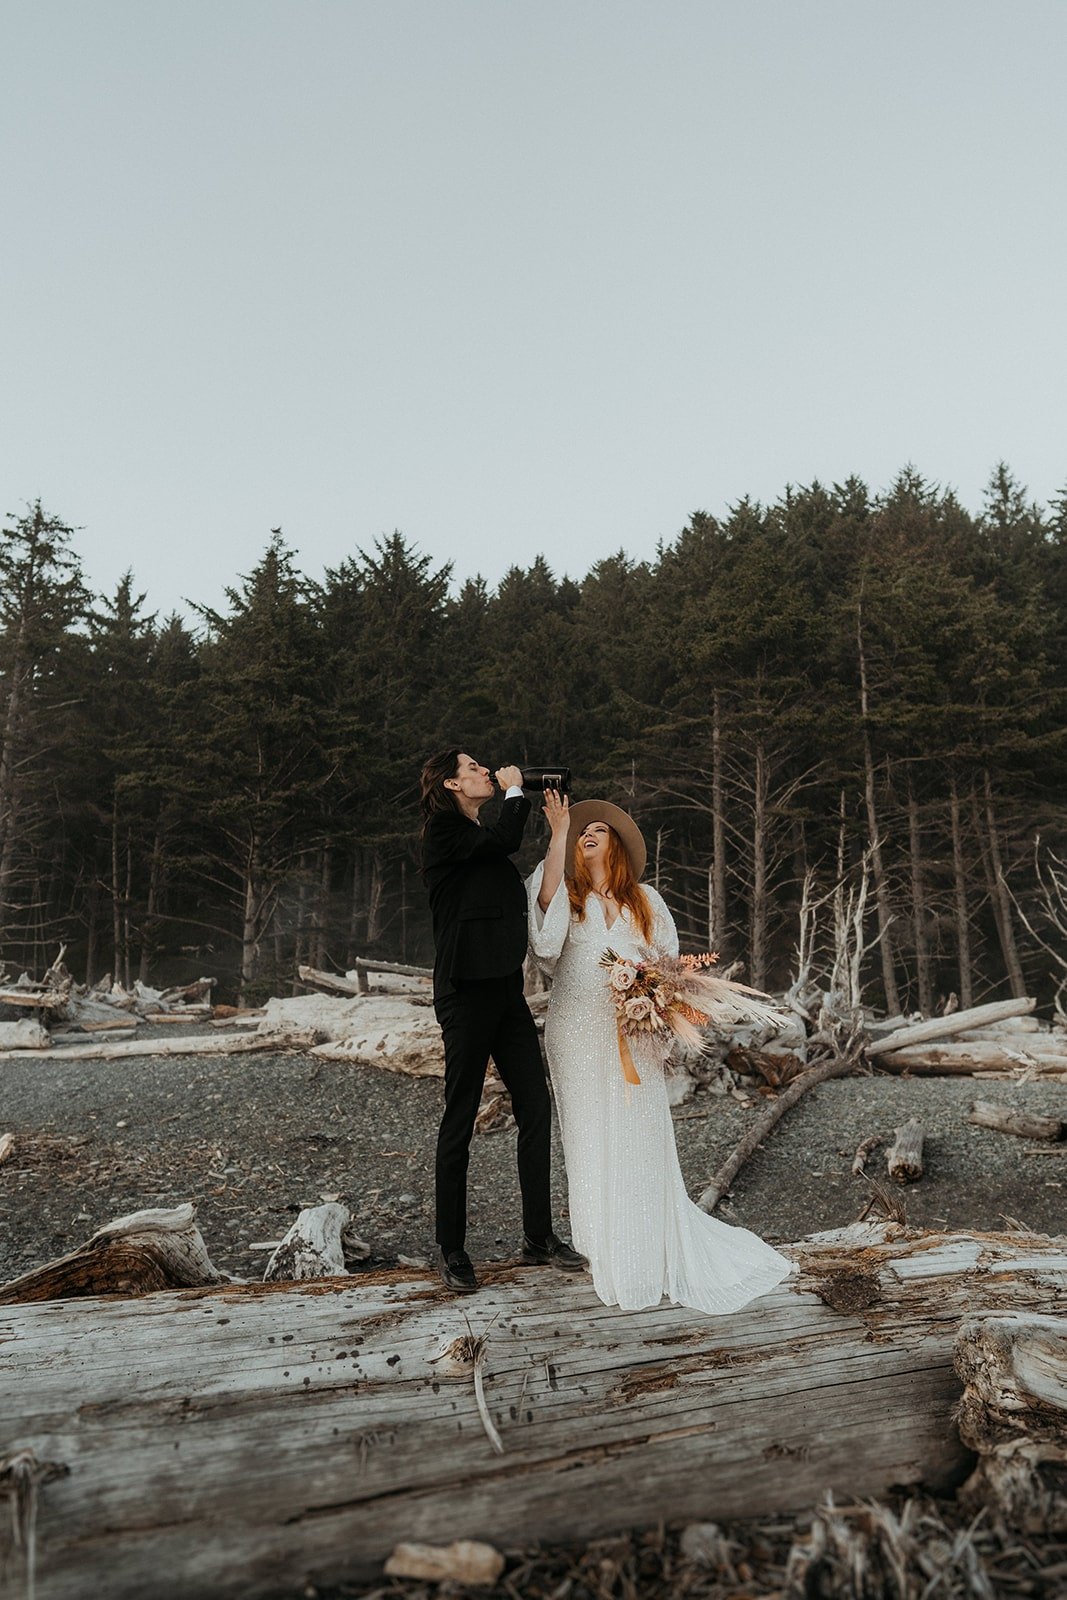 Bride and groom drink champagne during their Rialto Beach elopement